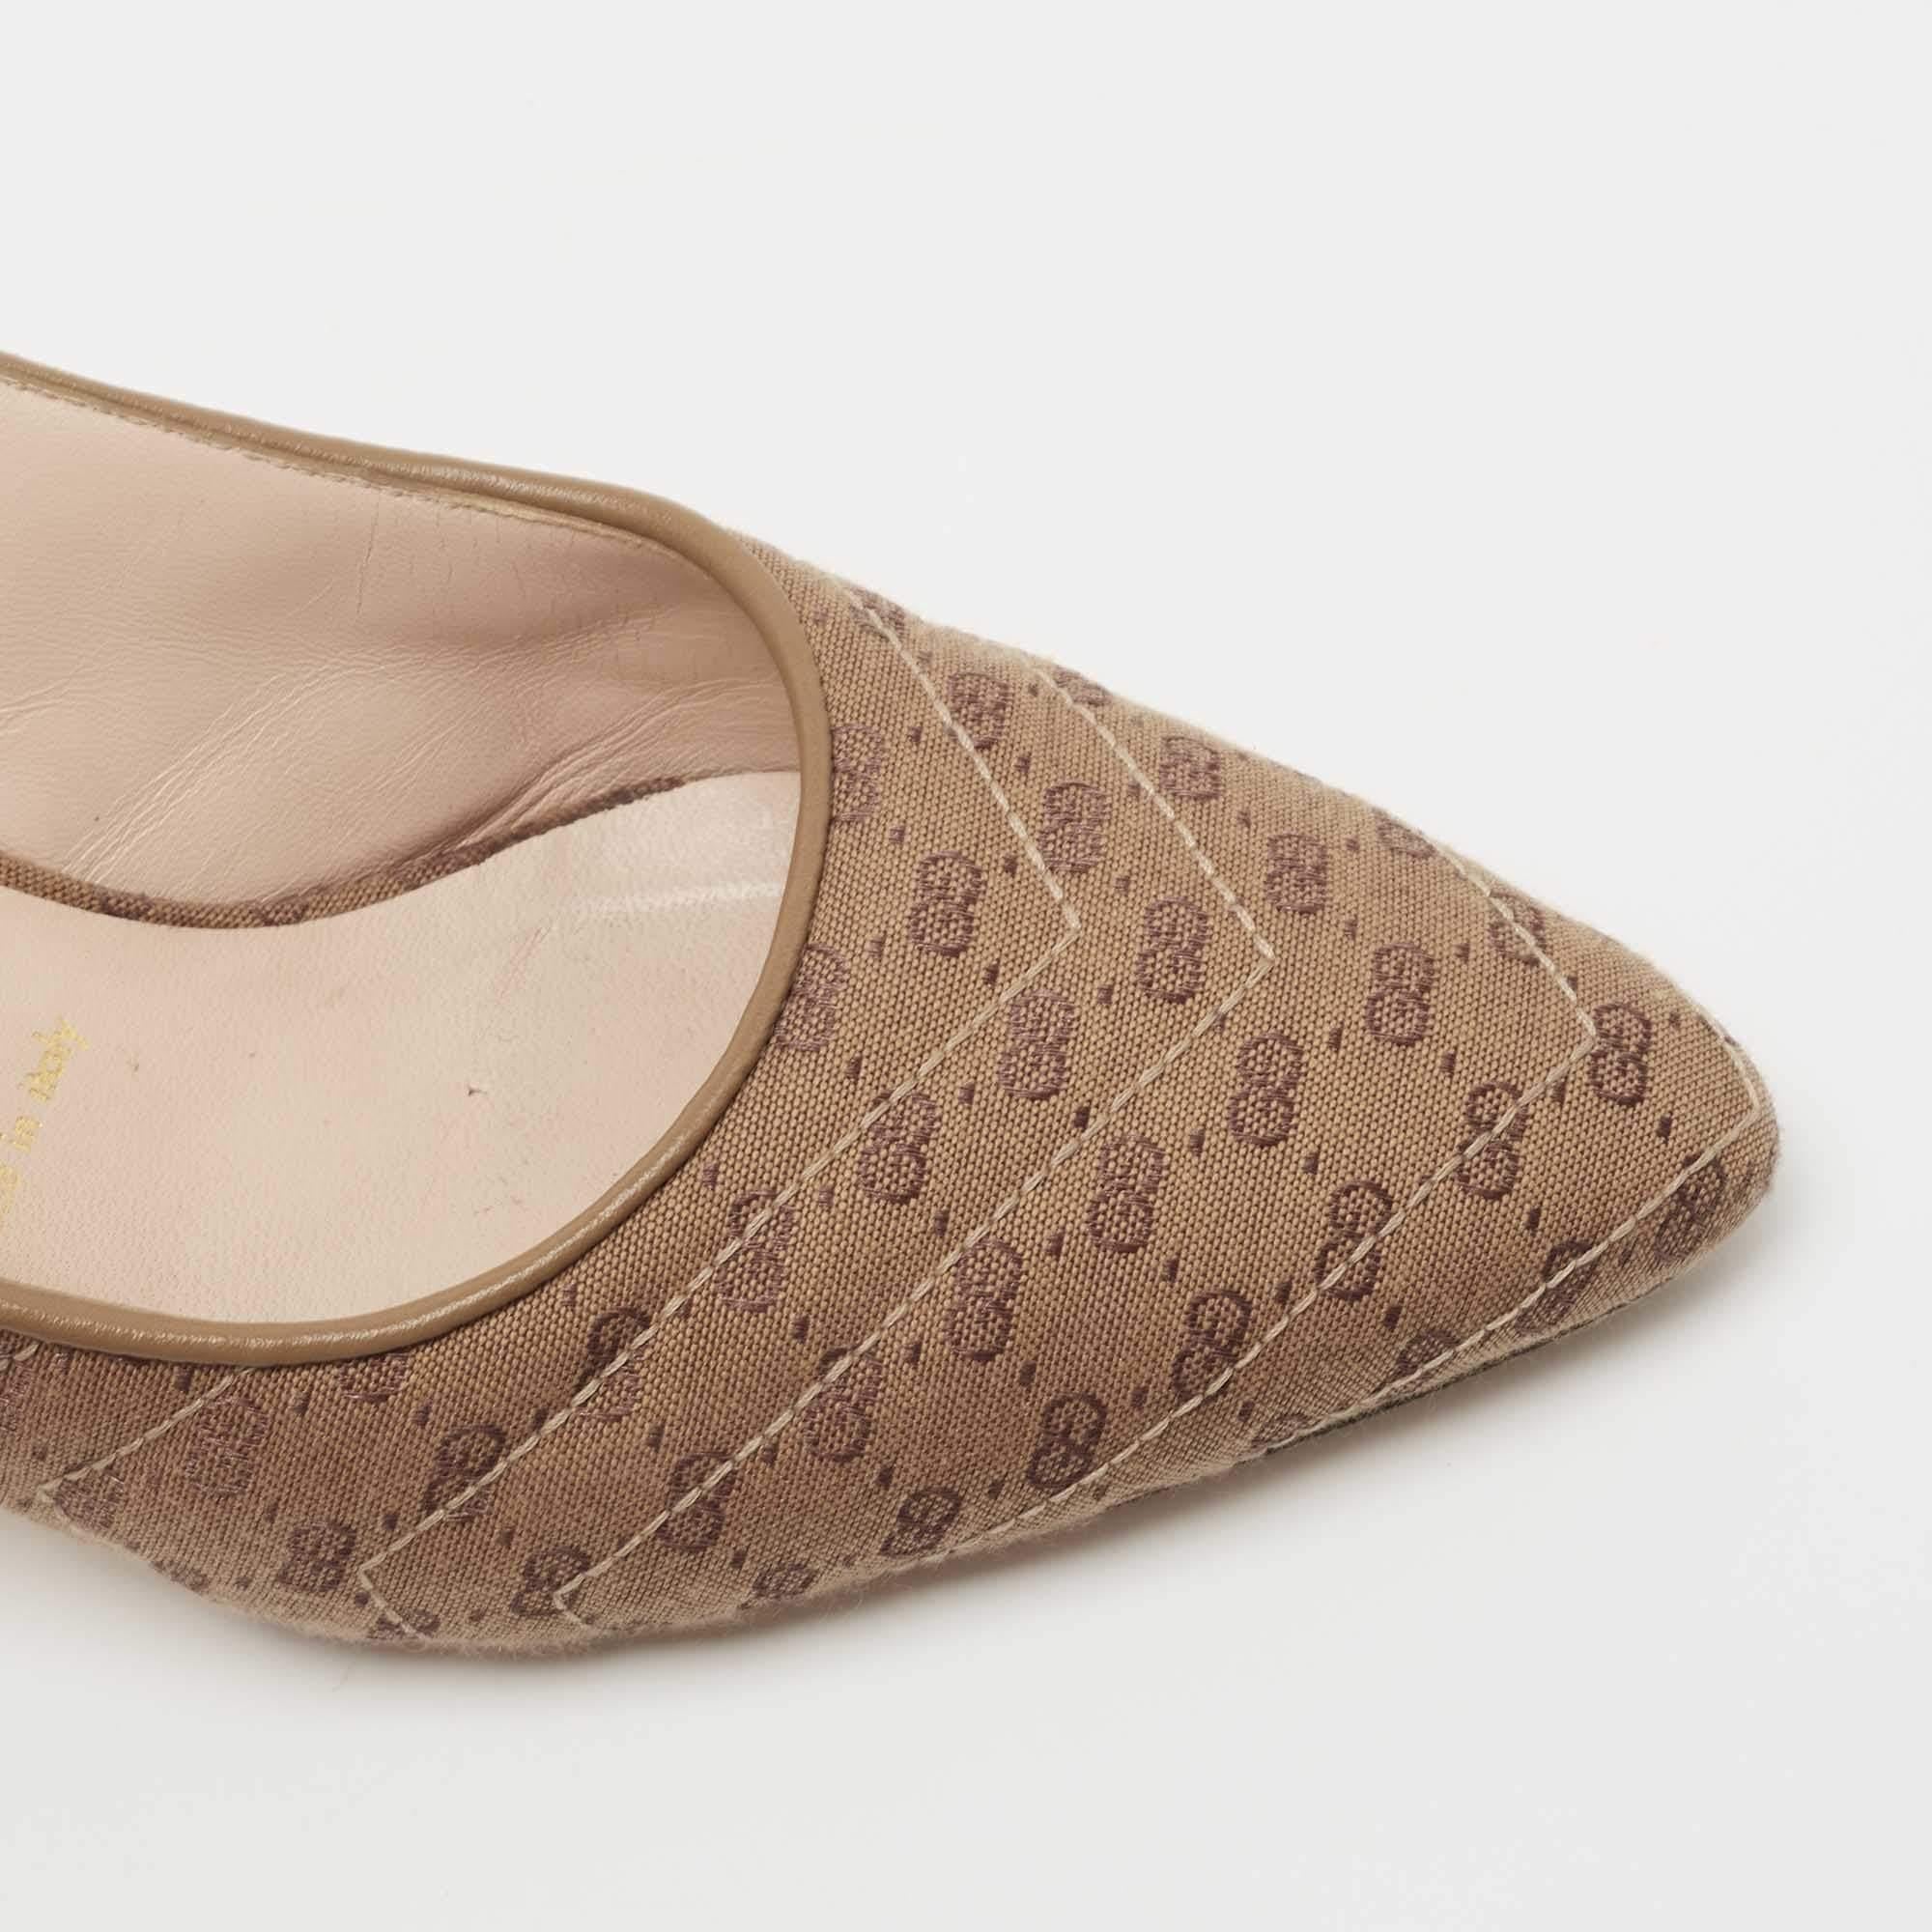 Gucci Brown GG Canvas Slingback Pumps Size 37.5 2